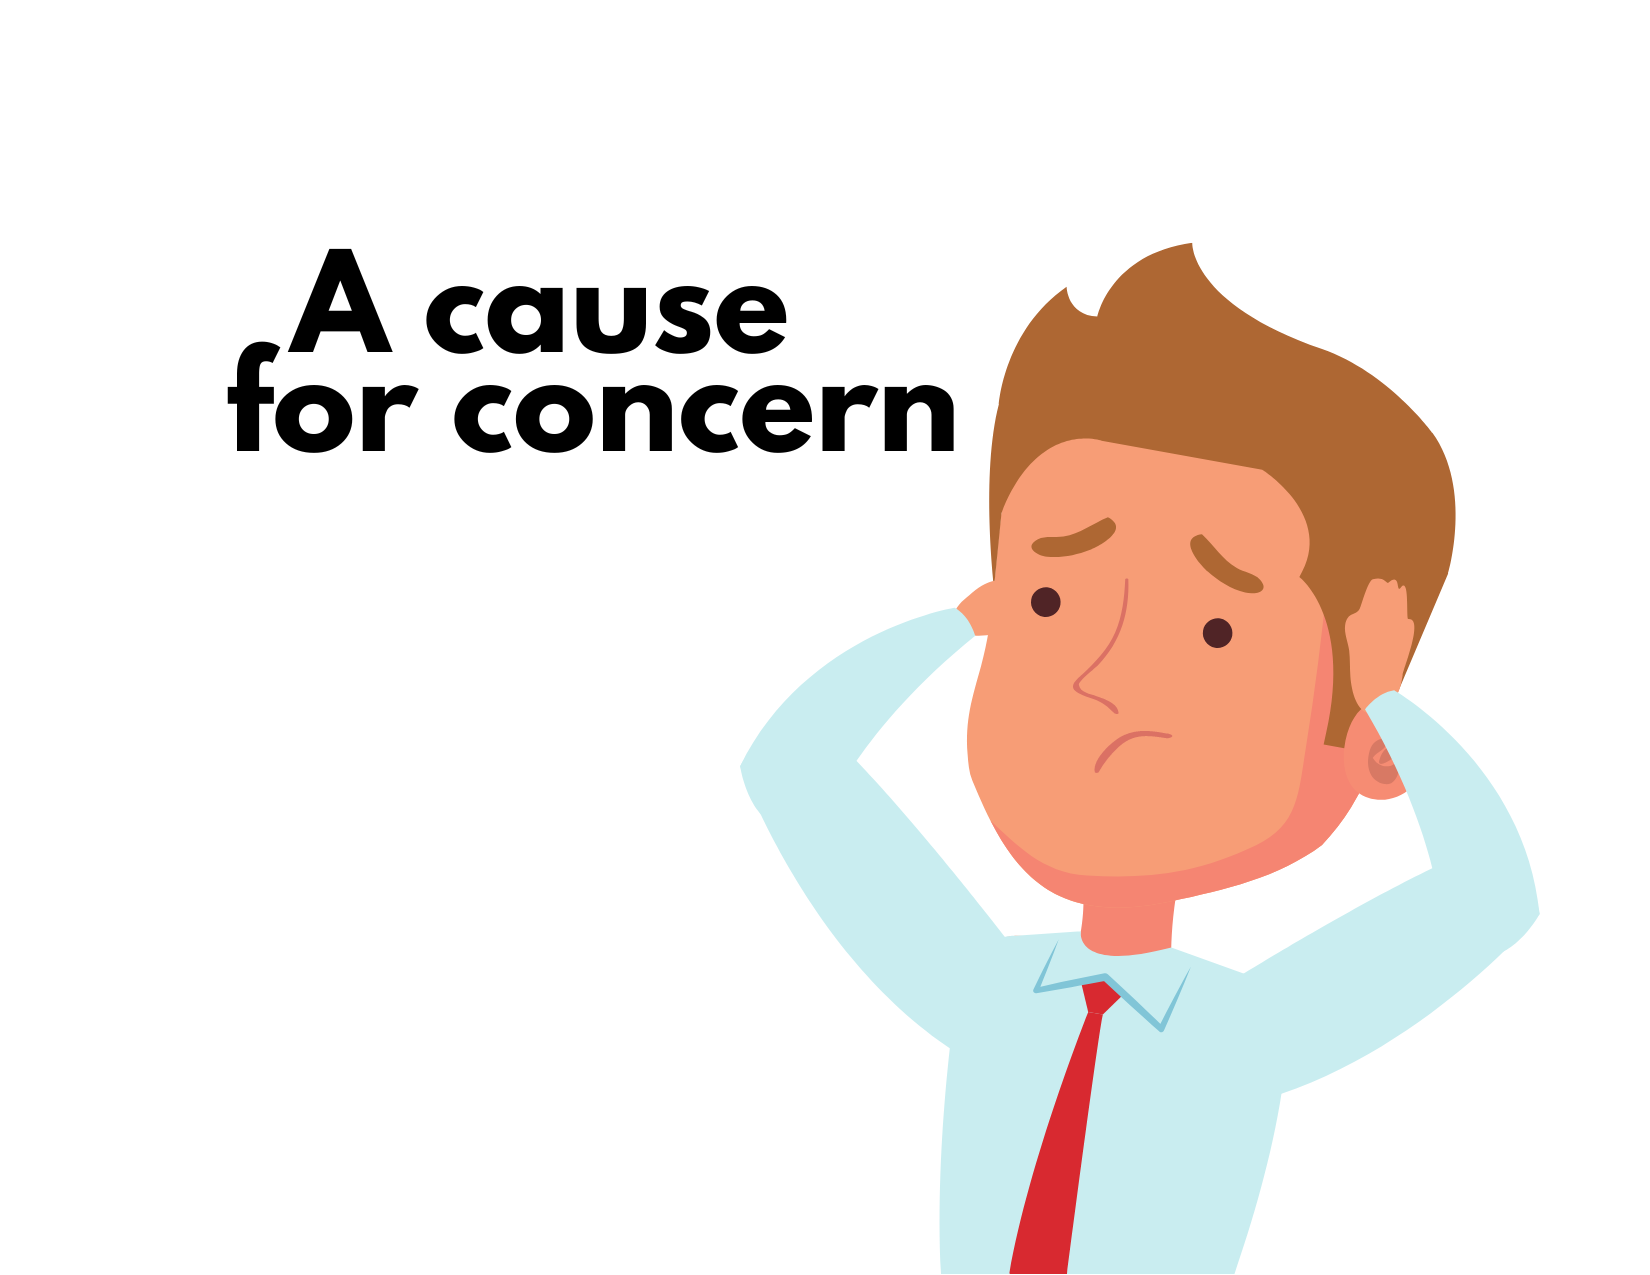 A clip art drawing of a worried man in a tie with the words "A cause for concern"